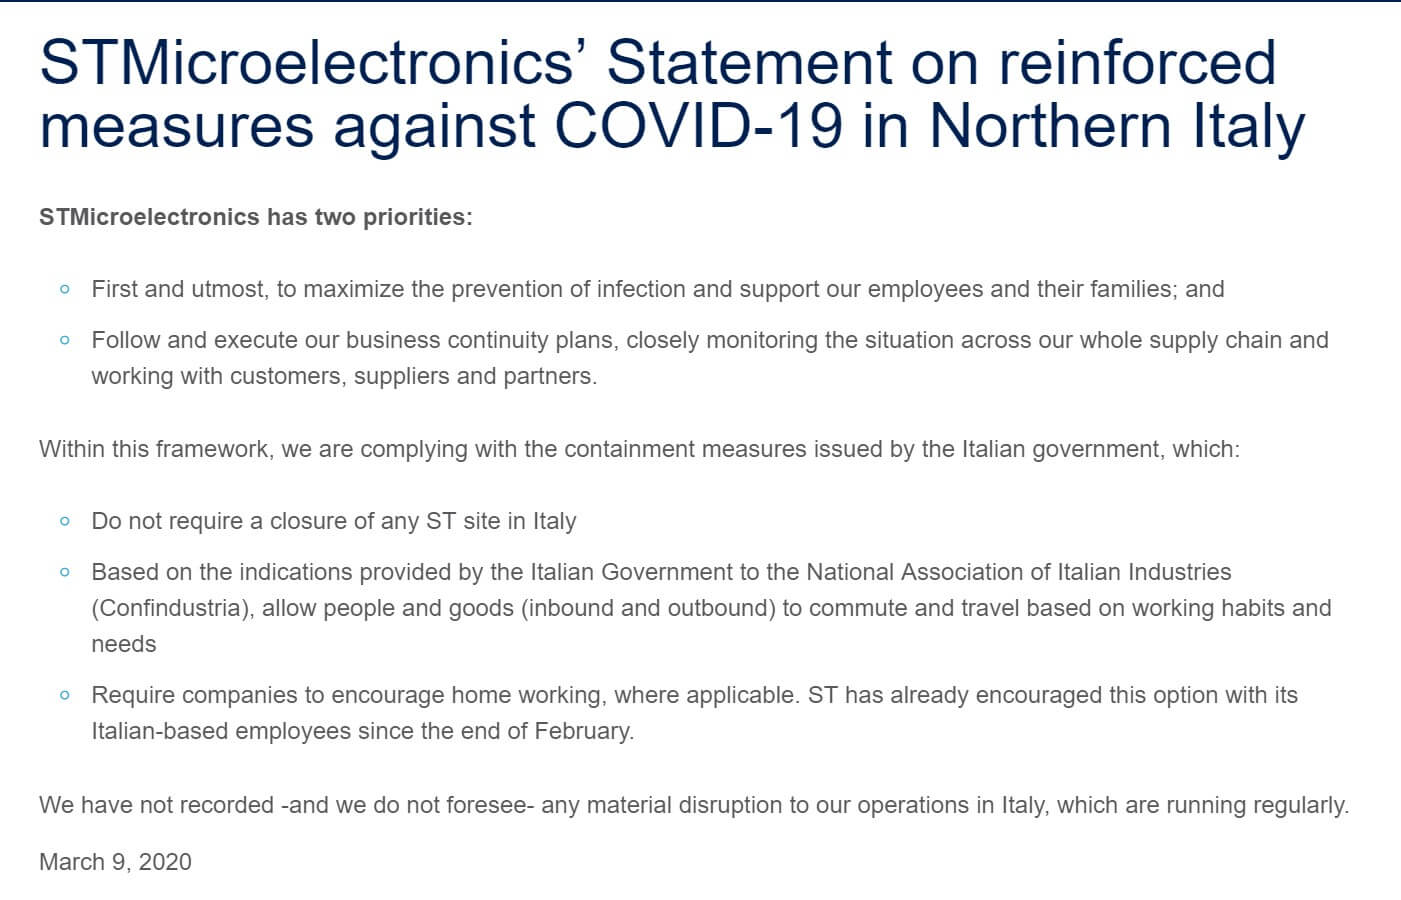 ST’s Statement on reinforced measures against COVID-19 in Northern Italy-SemiMedia